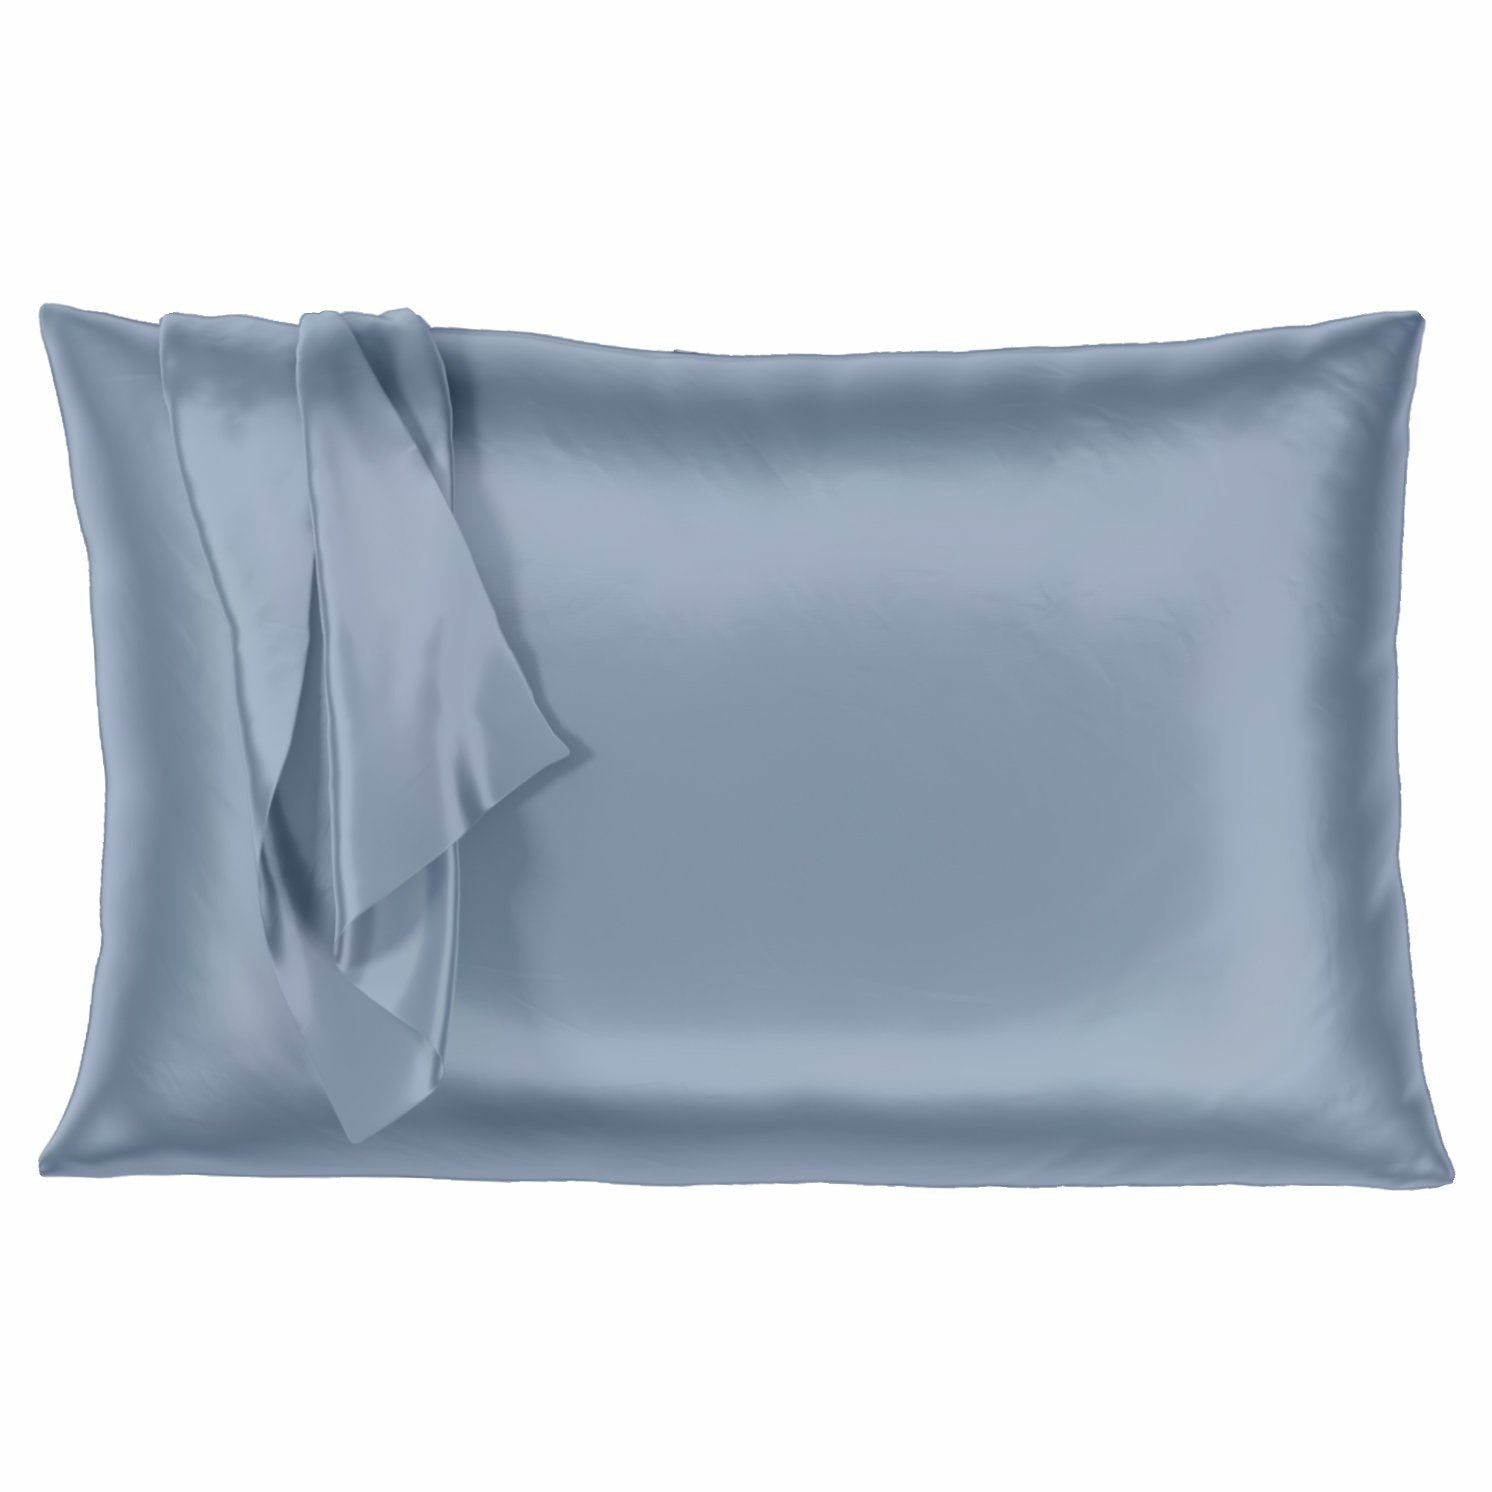 Mulberry Park Silks Deluxe 22 Momme Pure Silk Pillowcase - Steel Blue